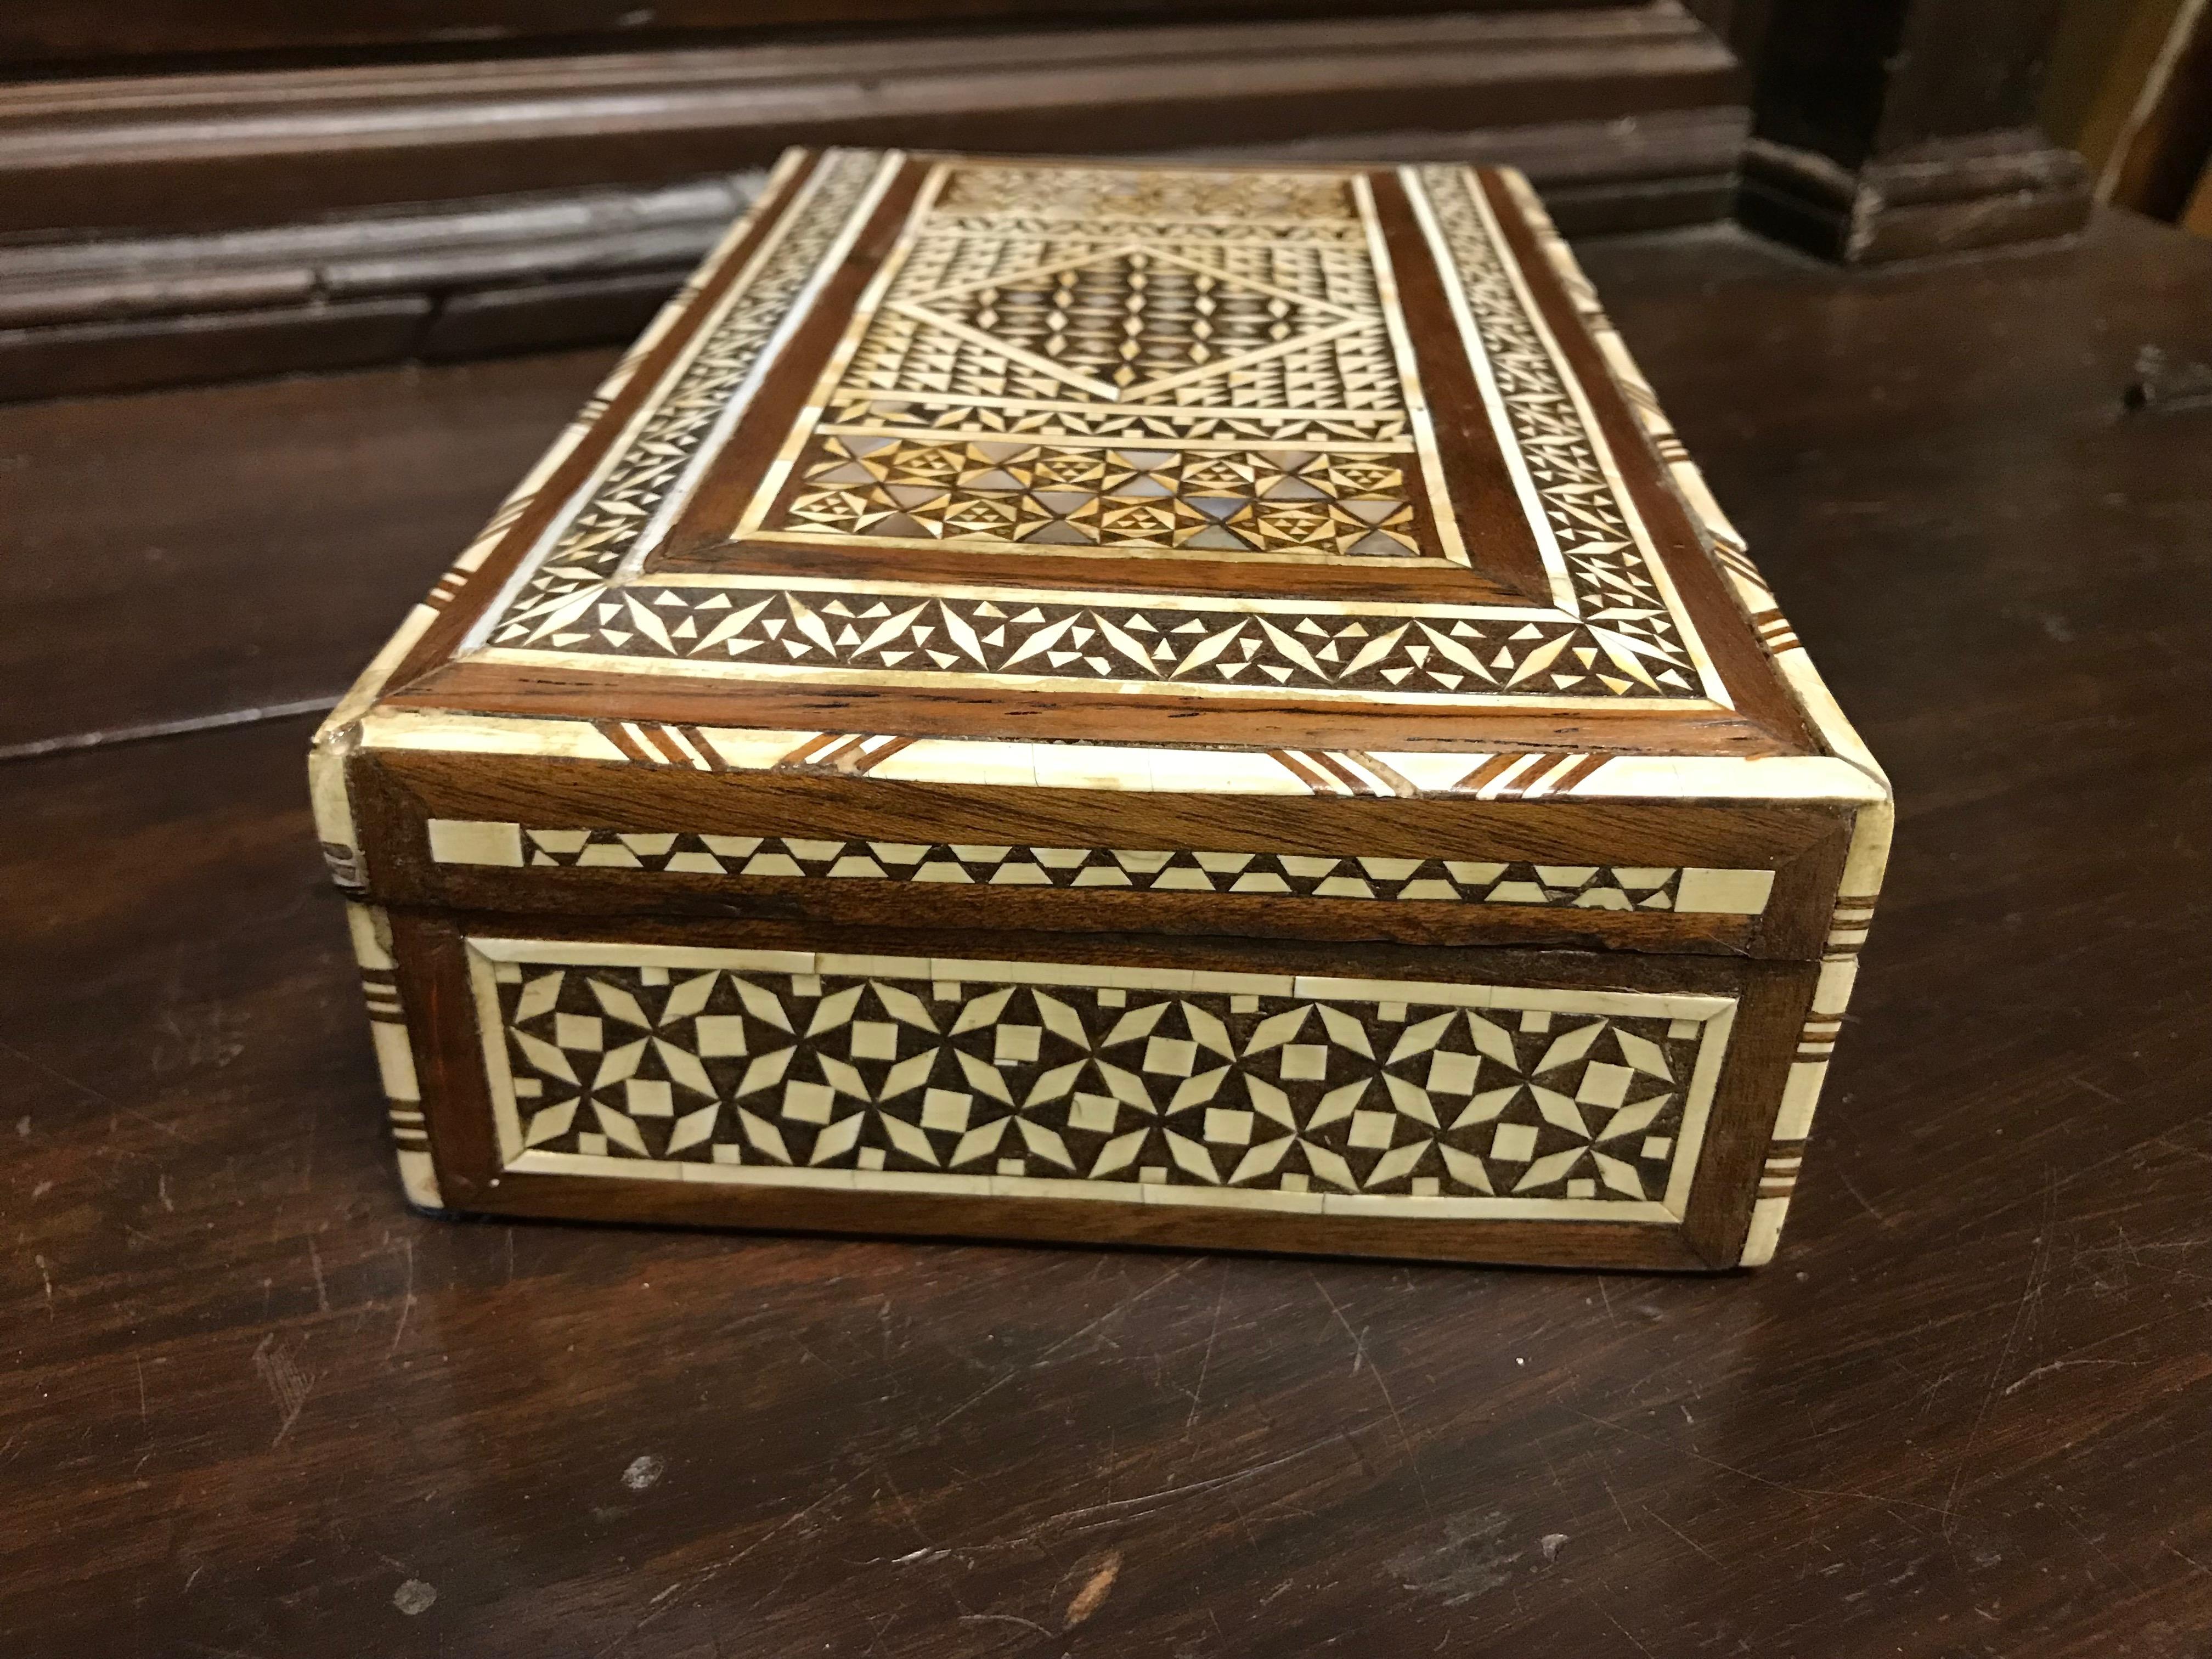 mother of pearl boxes india